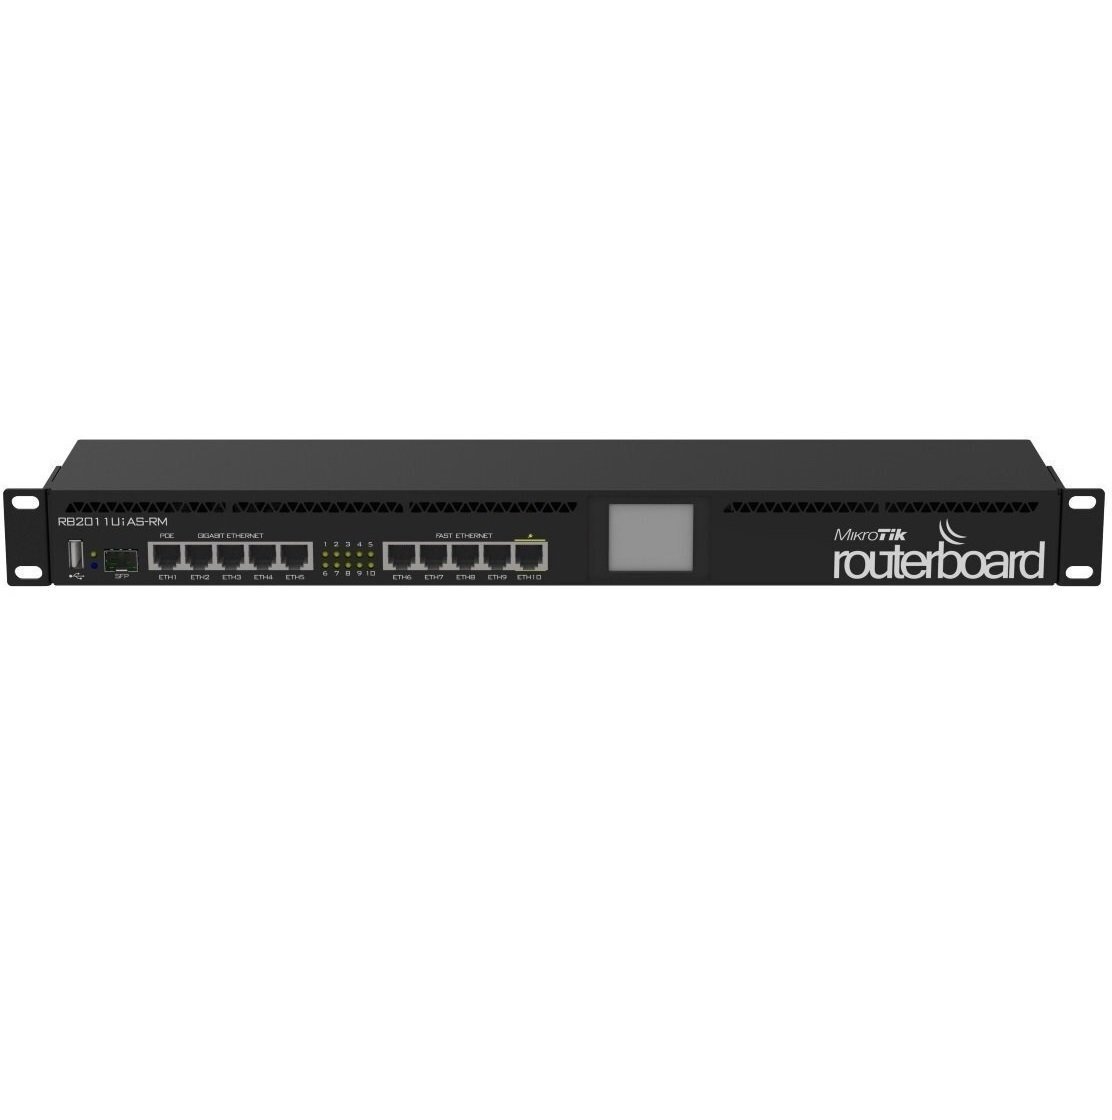 Маршрутизатор MikroTik RouterBOARD 2011UiAS 5xFE, 5xGE, 1xSFP, RouterOS L5, LCD panel, rack (RB2011UIAS-RM) фото 